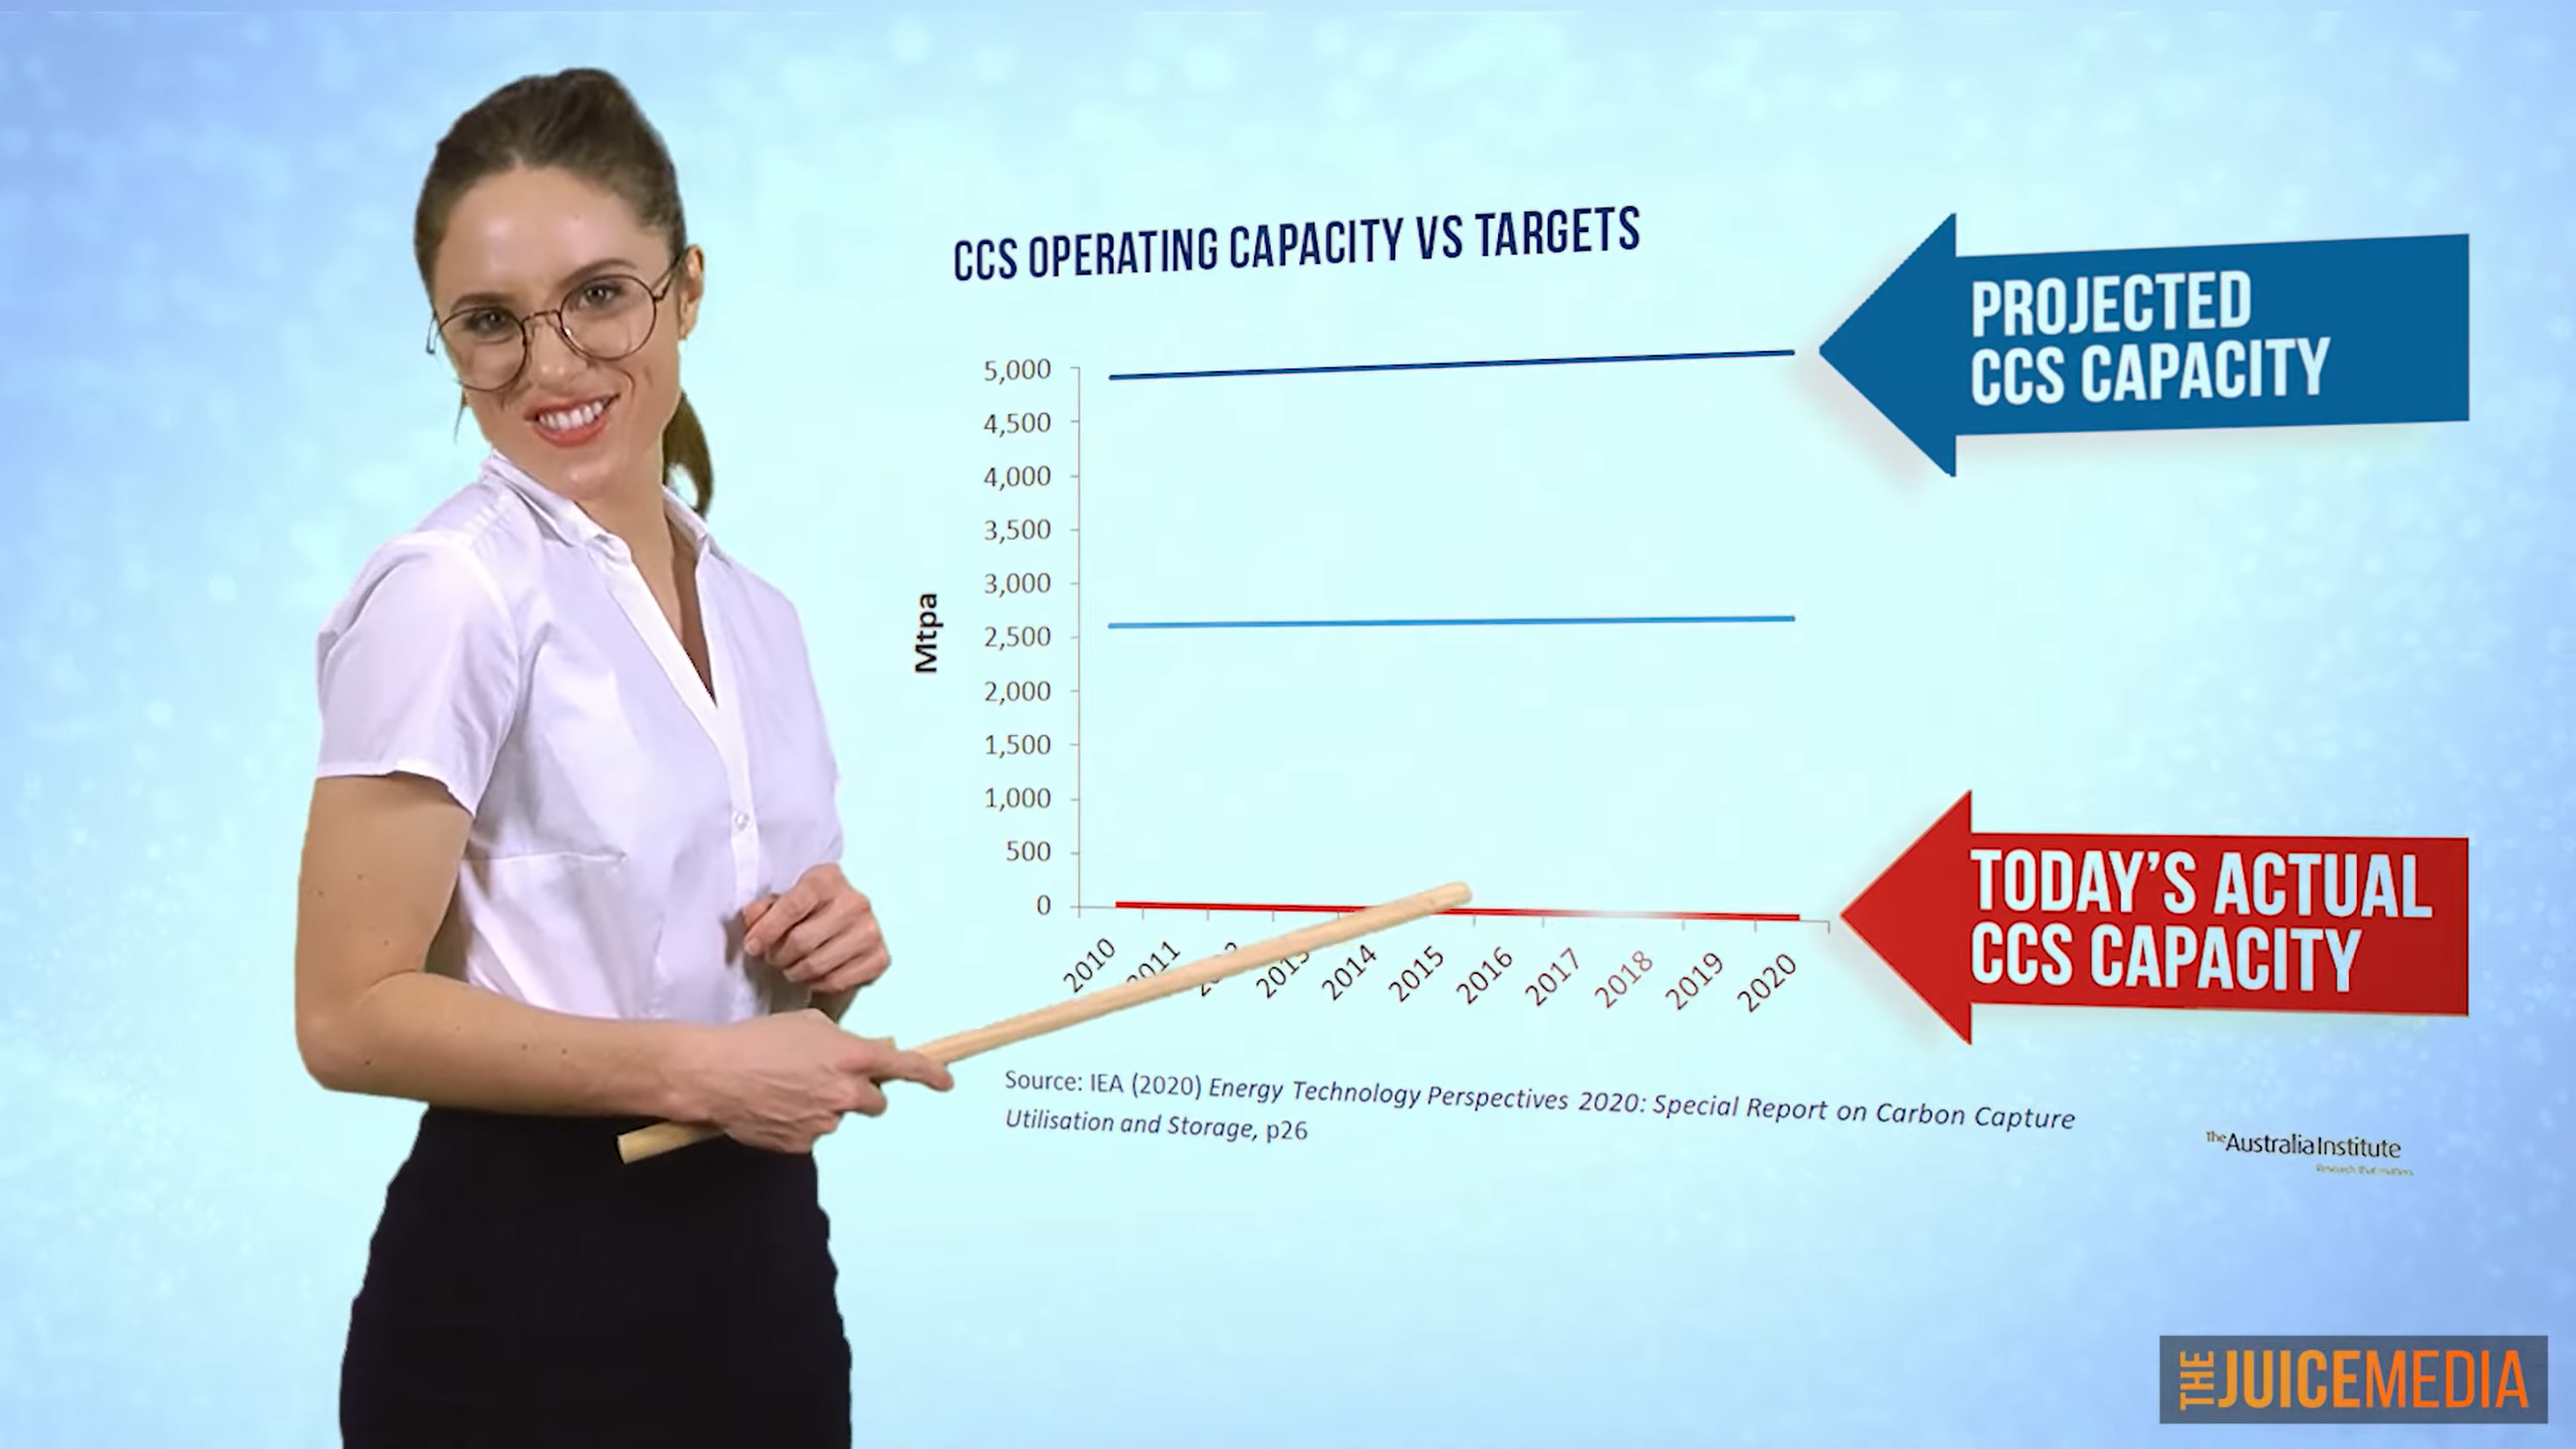 Global Carbon Capture and Storage (CCS) capacity, 2010-2020. Twenty years ago, the fossil fuel industry told you that by today, CCS would capture 5,000 million tons of CO2 per year. Today, the world can barely capture 10. Which is so far off target you can’t even see it on this graph. And when you remember that our global emissions are 36 BILLION tonnes each year, even if it had met its target, it would contribute approximately FUCK ALL. Data: IEA. Graphic: The Juice Media